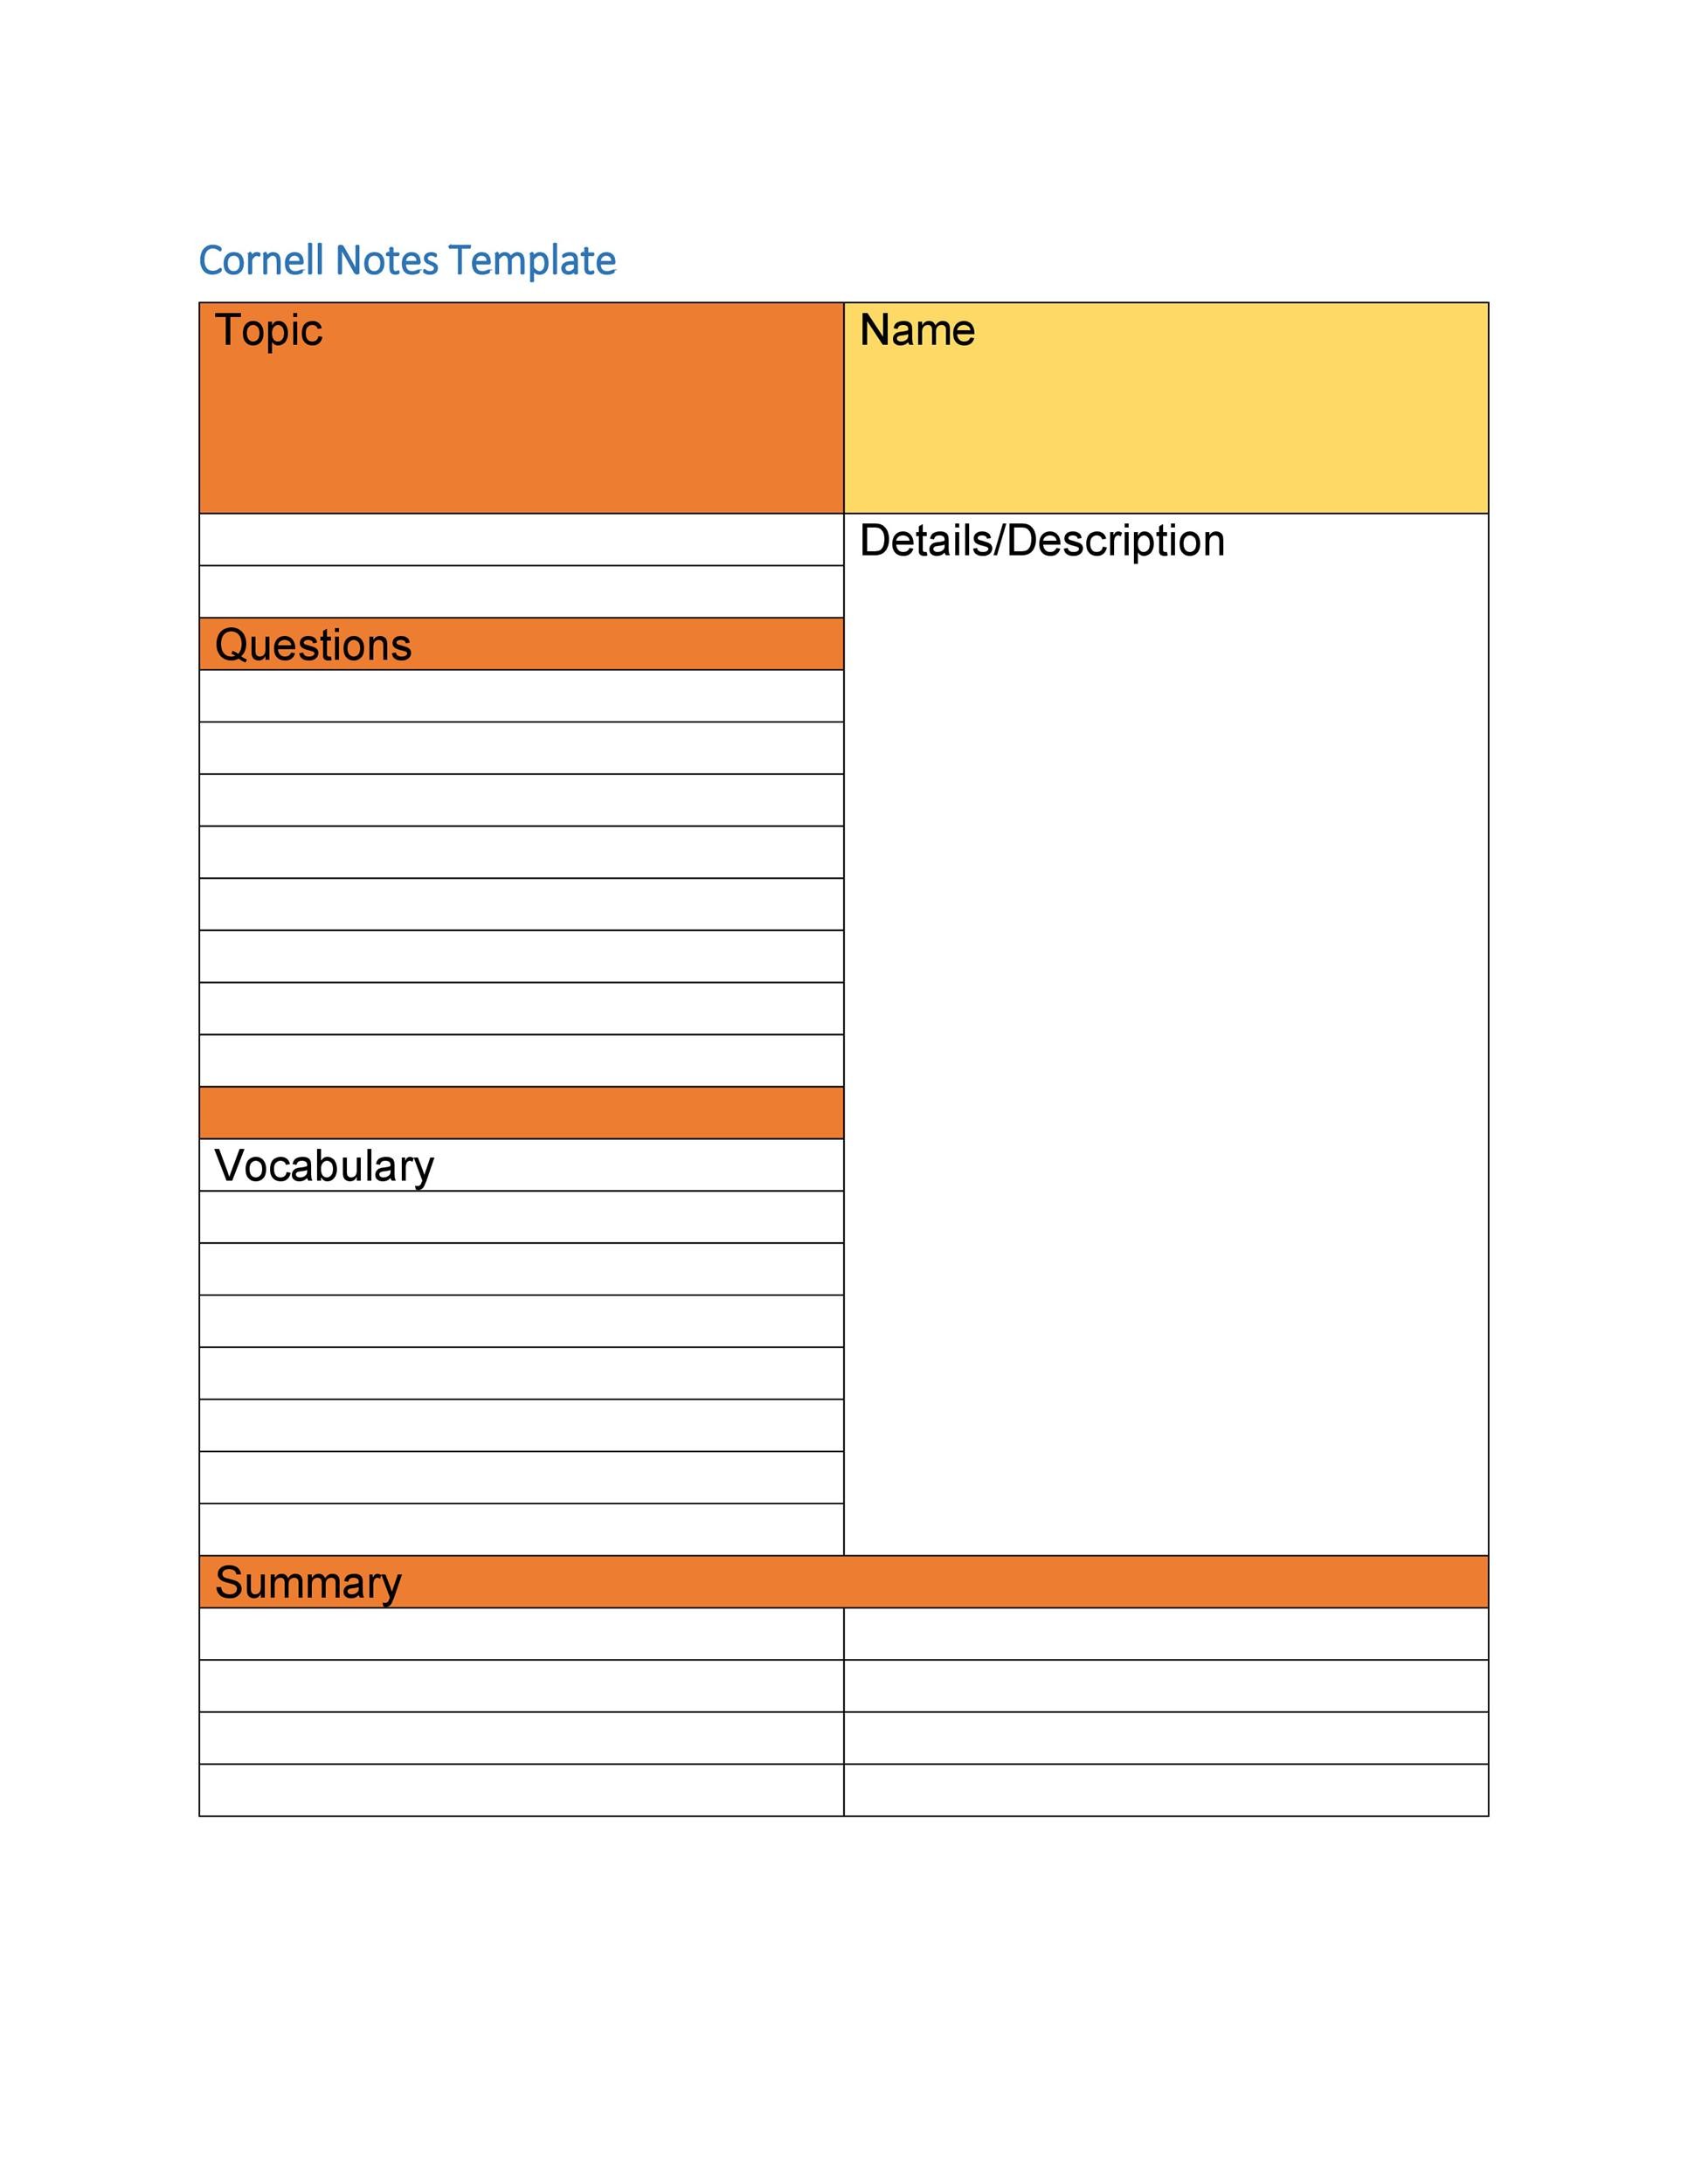 Free Printable Note Taking Templates 36 Cornell Notes Templates Examples Word PDF 